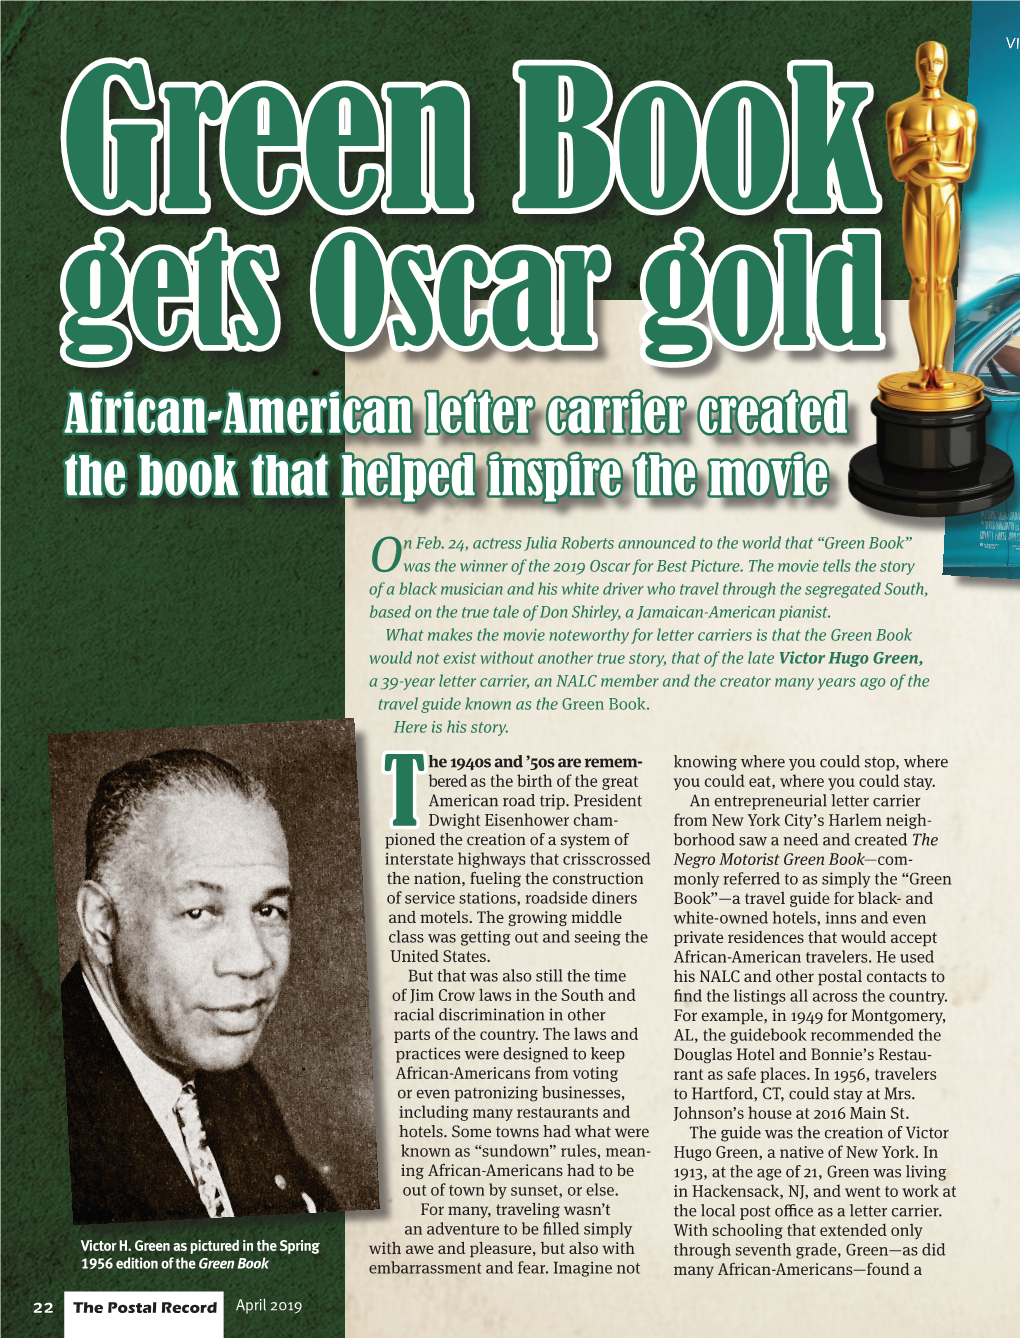 Green Book Gets Oscar Gold African-American Letter Carrier Created the Book That Helped Inspire the Movie